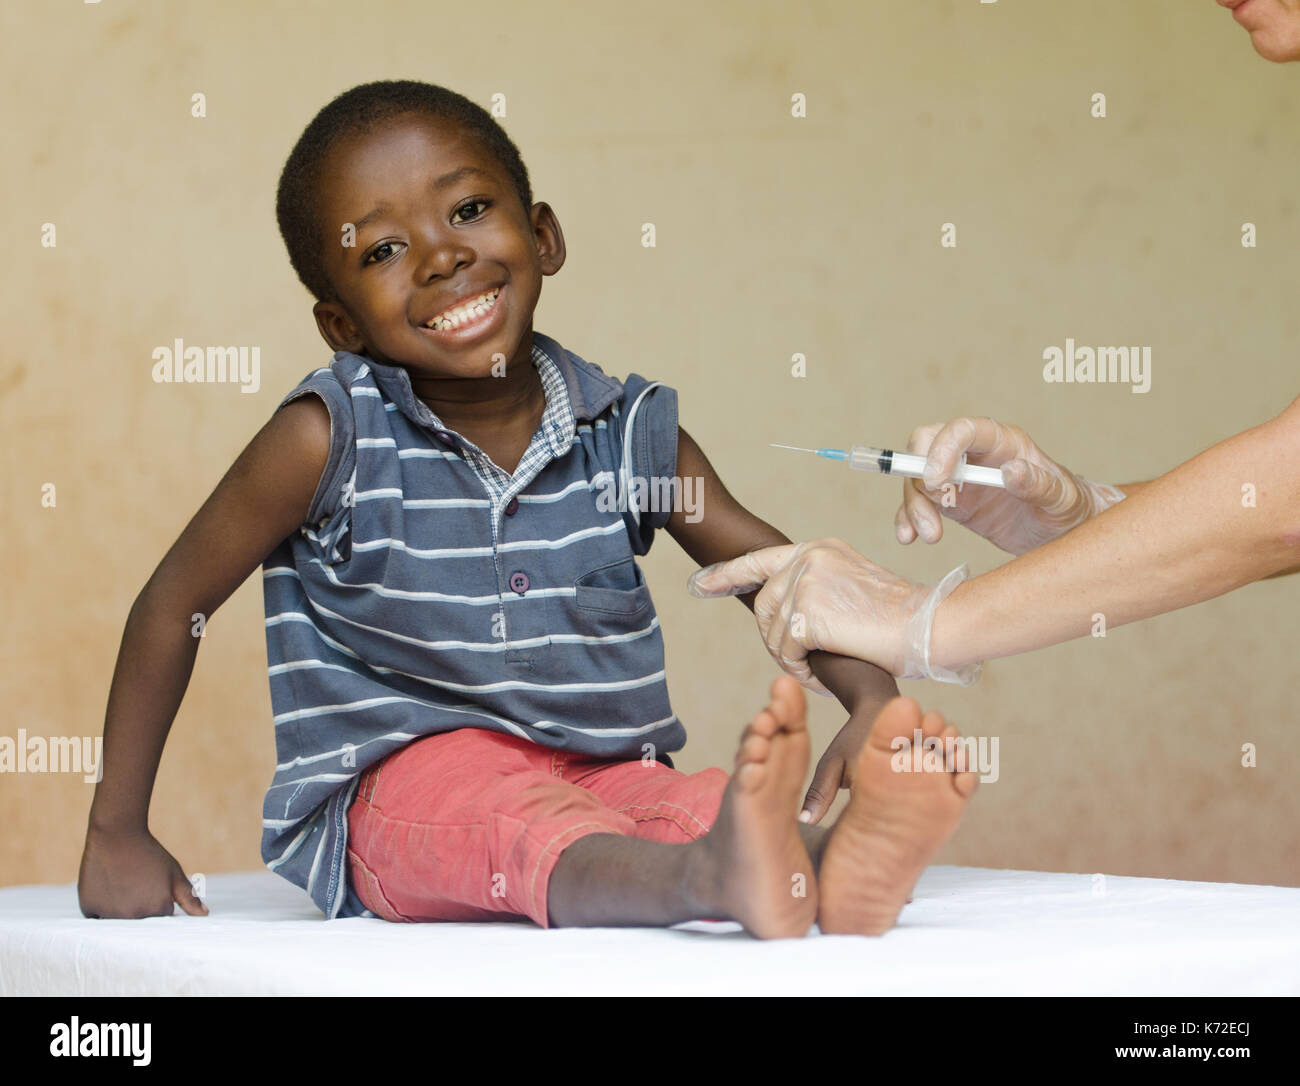 Full body shot of a happy African black child getting a needle injection as a medical vaccination Stock Photo